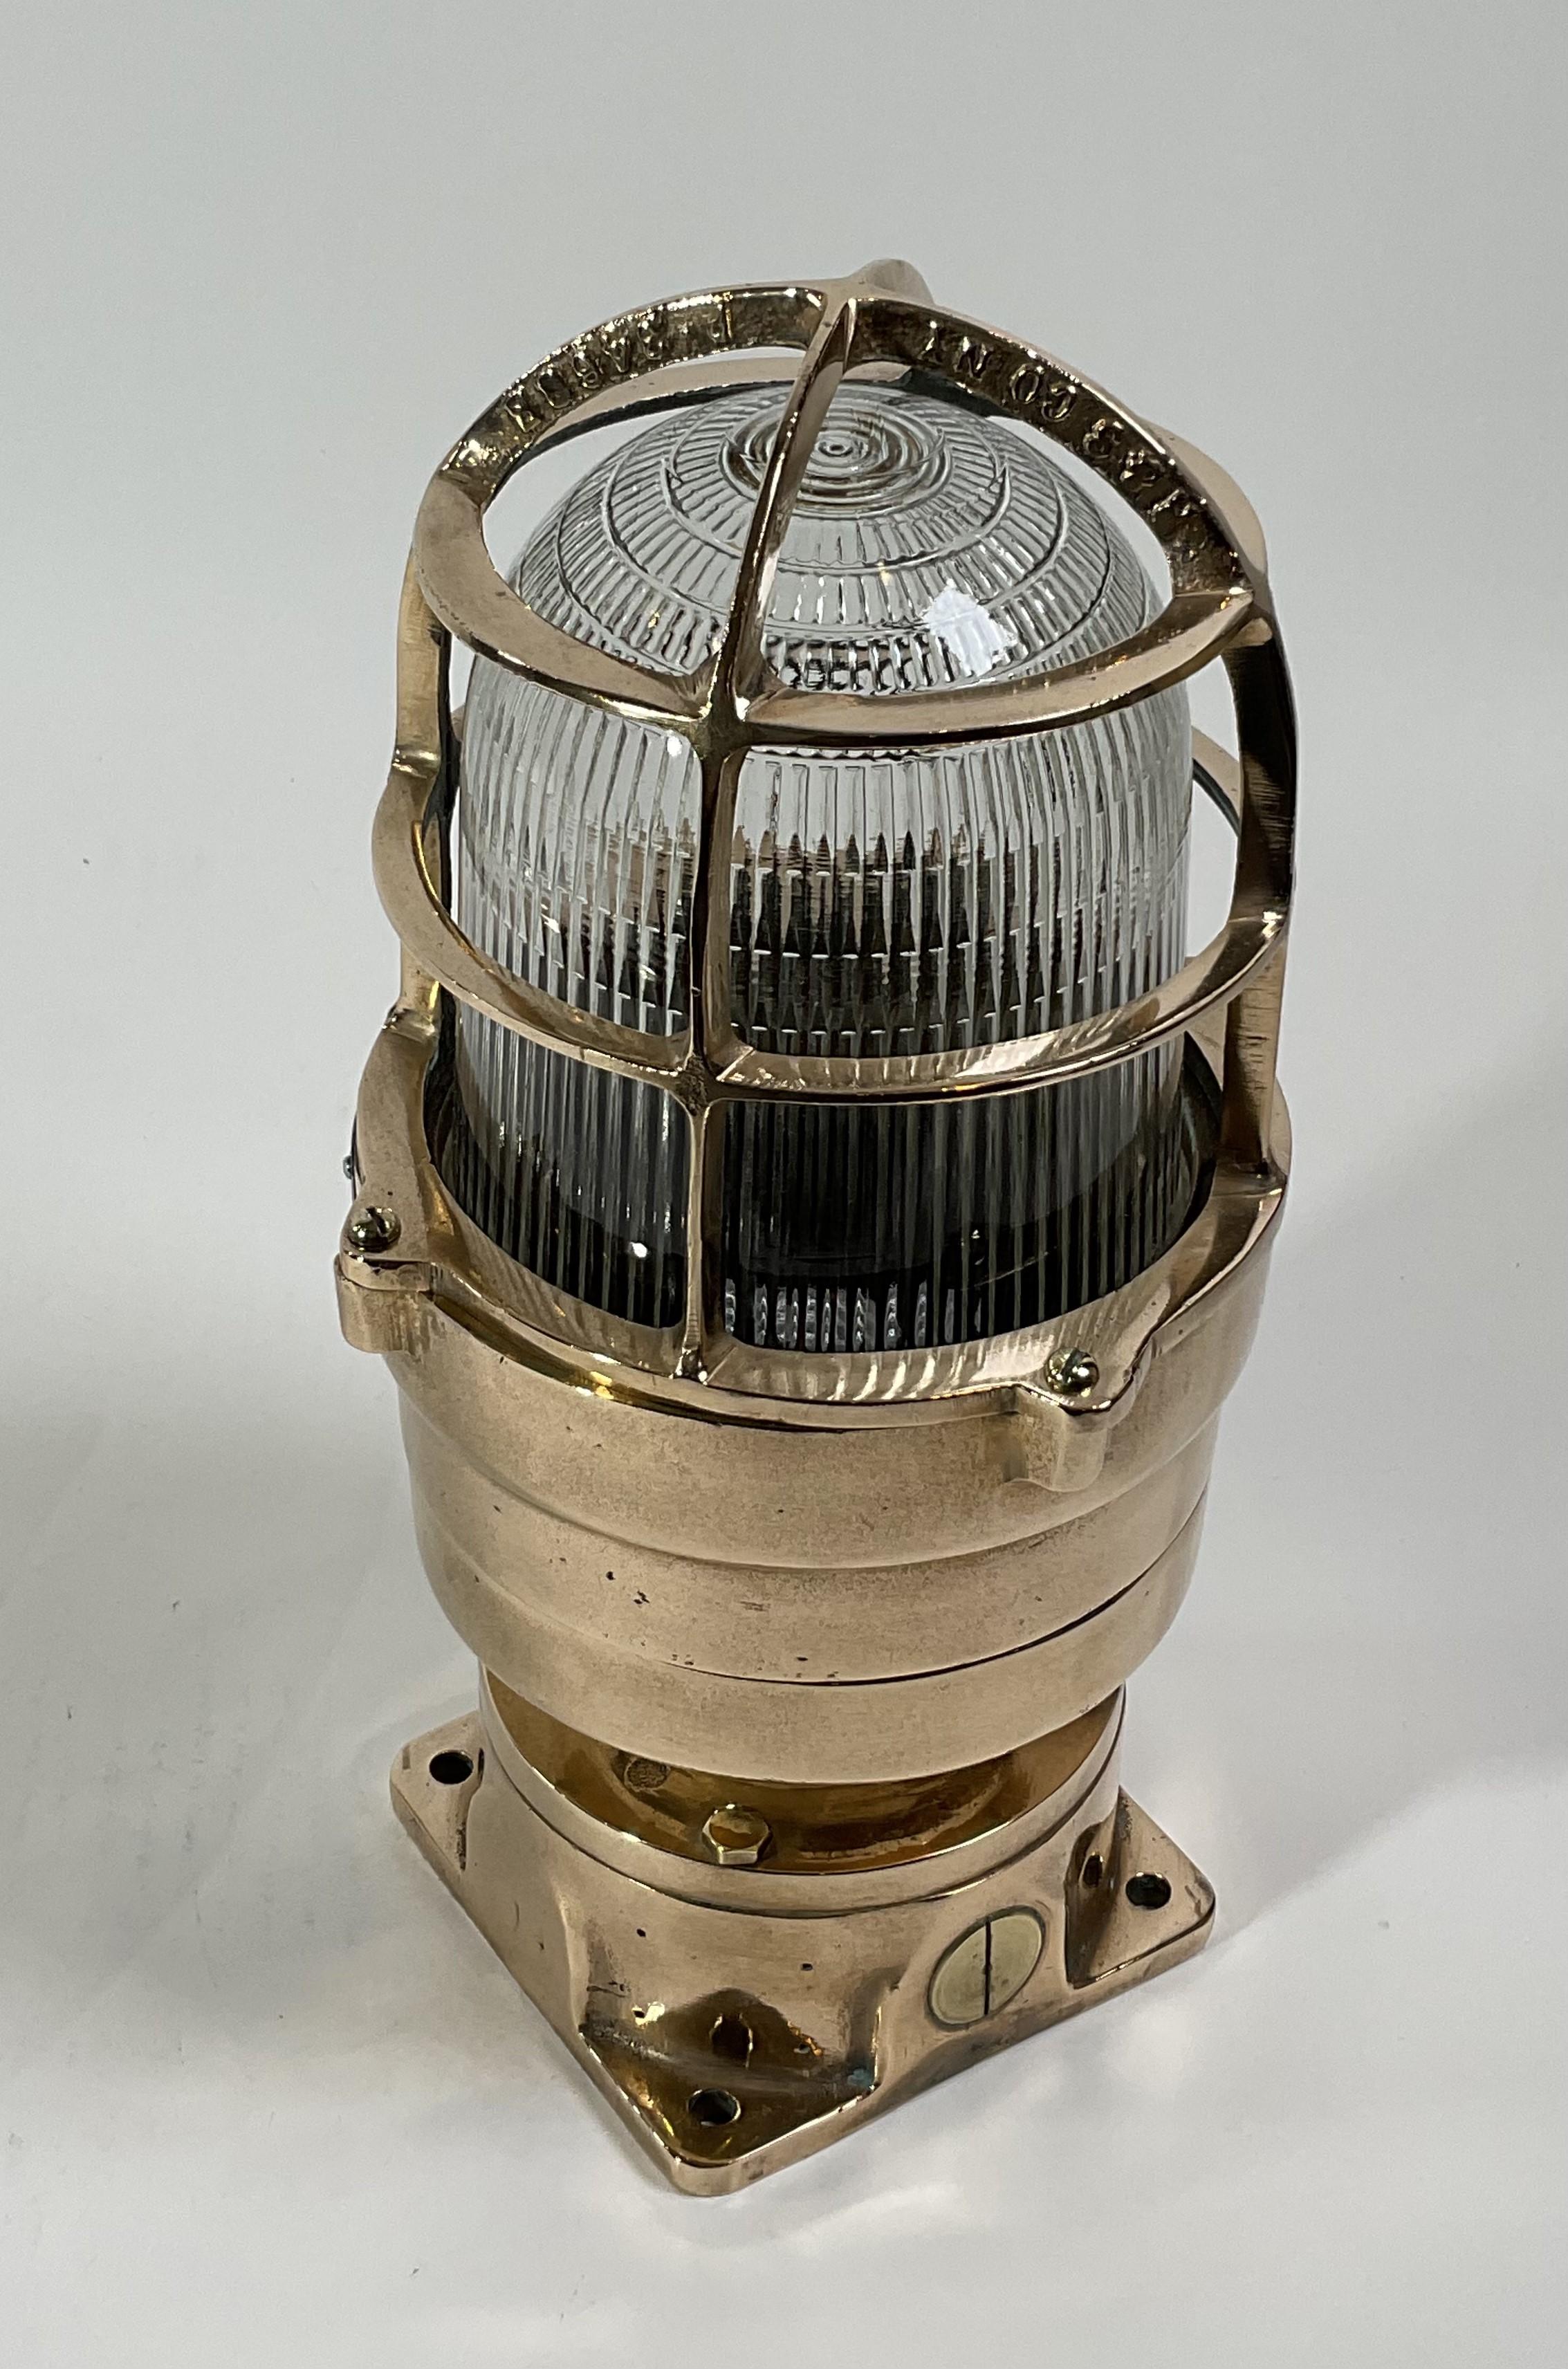 Brass marine beacon by Russel Stoll. Heavy brass ships explosion proof marine beacon. The Fresnel glass lens in protected by a heavy brass cage that is fastened to a sturdy columnar base with four flange feet. Circa 1960. 